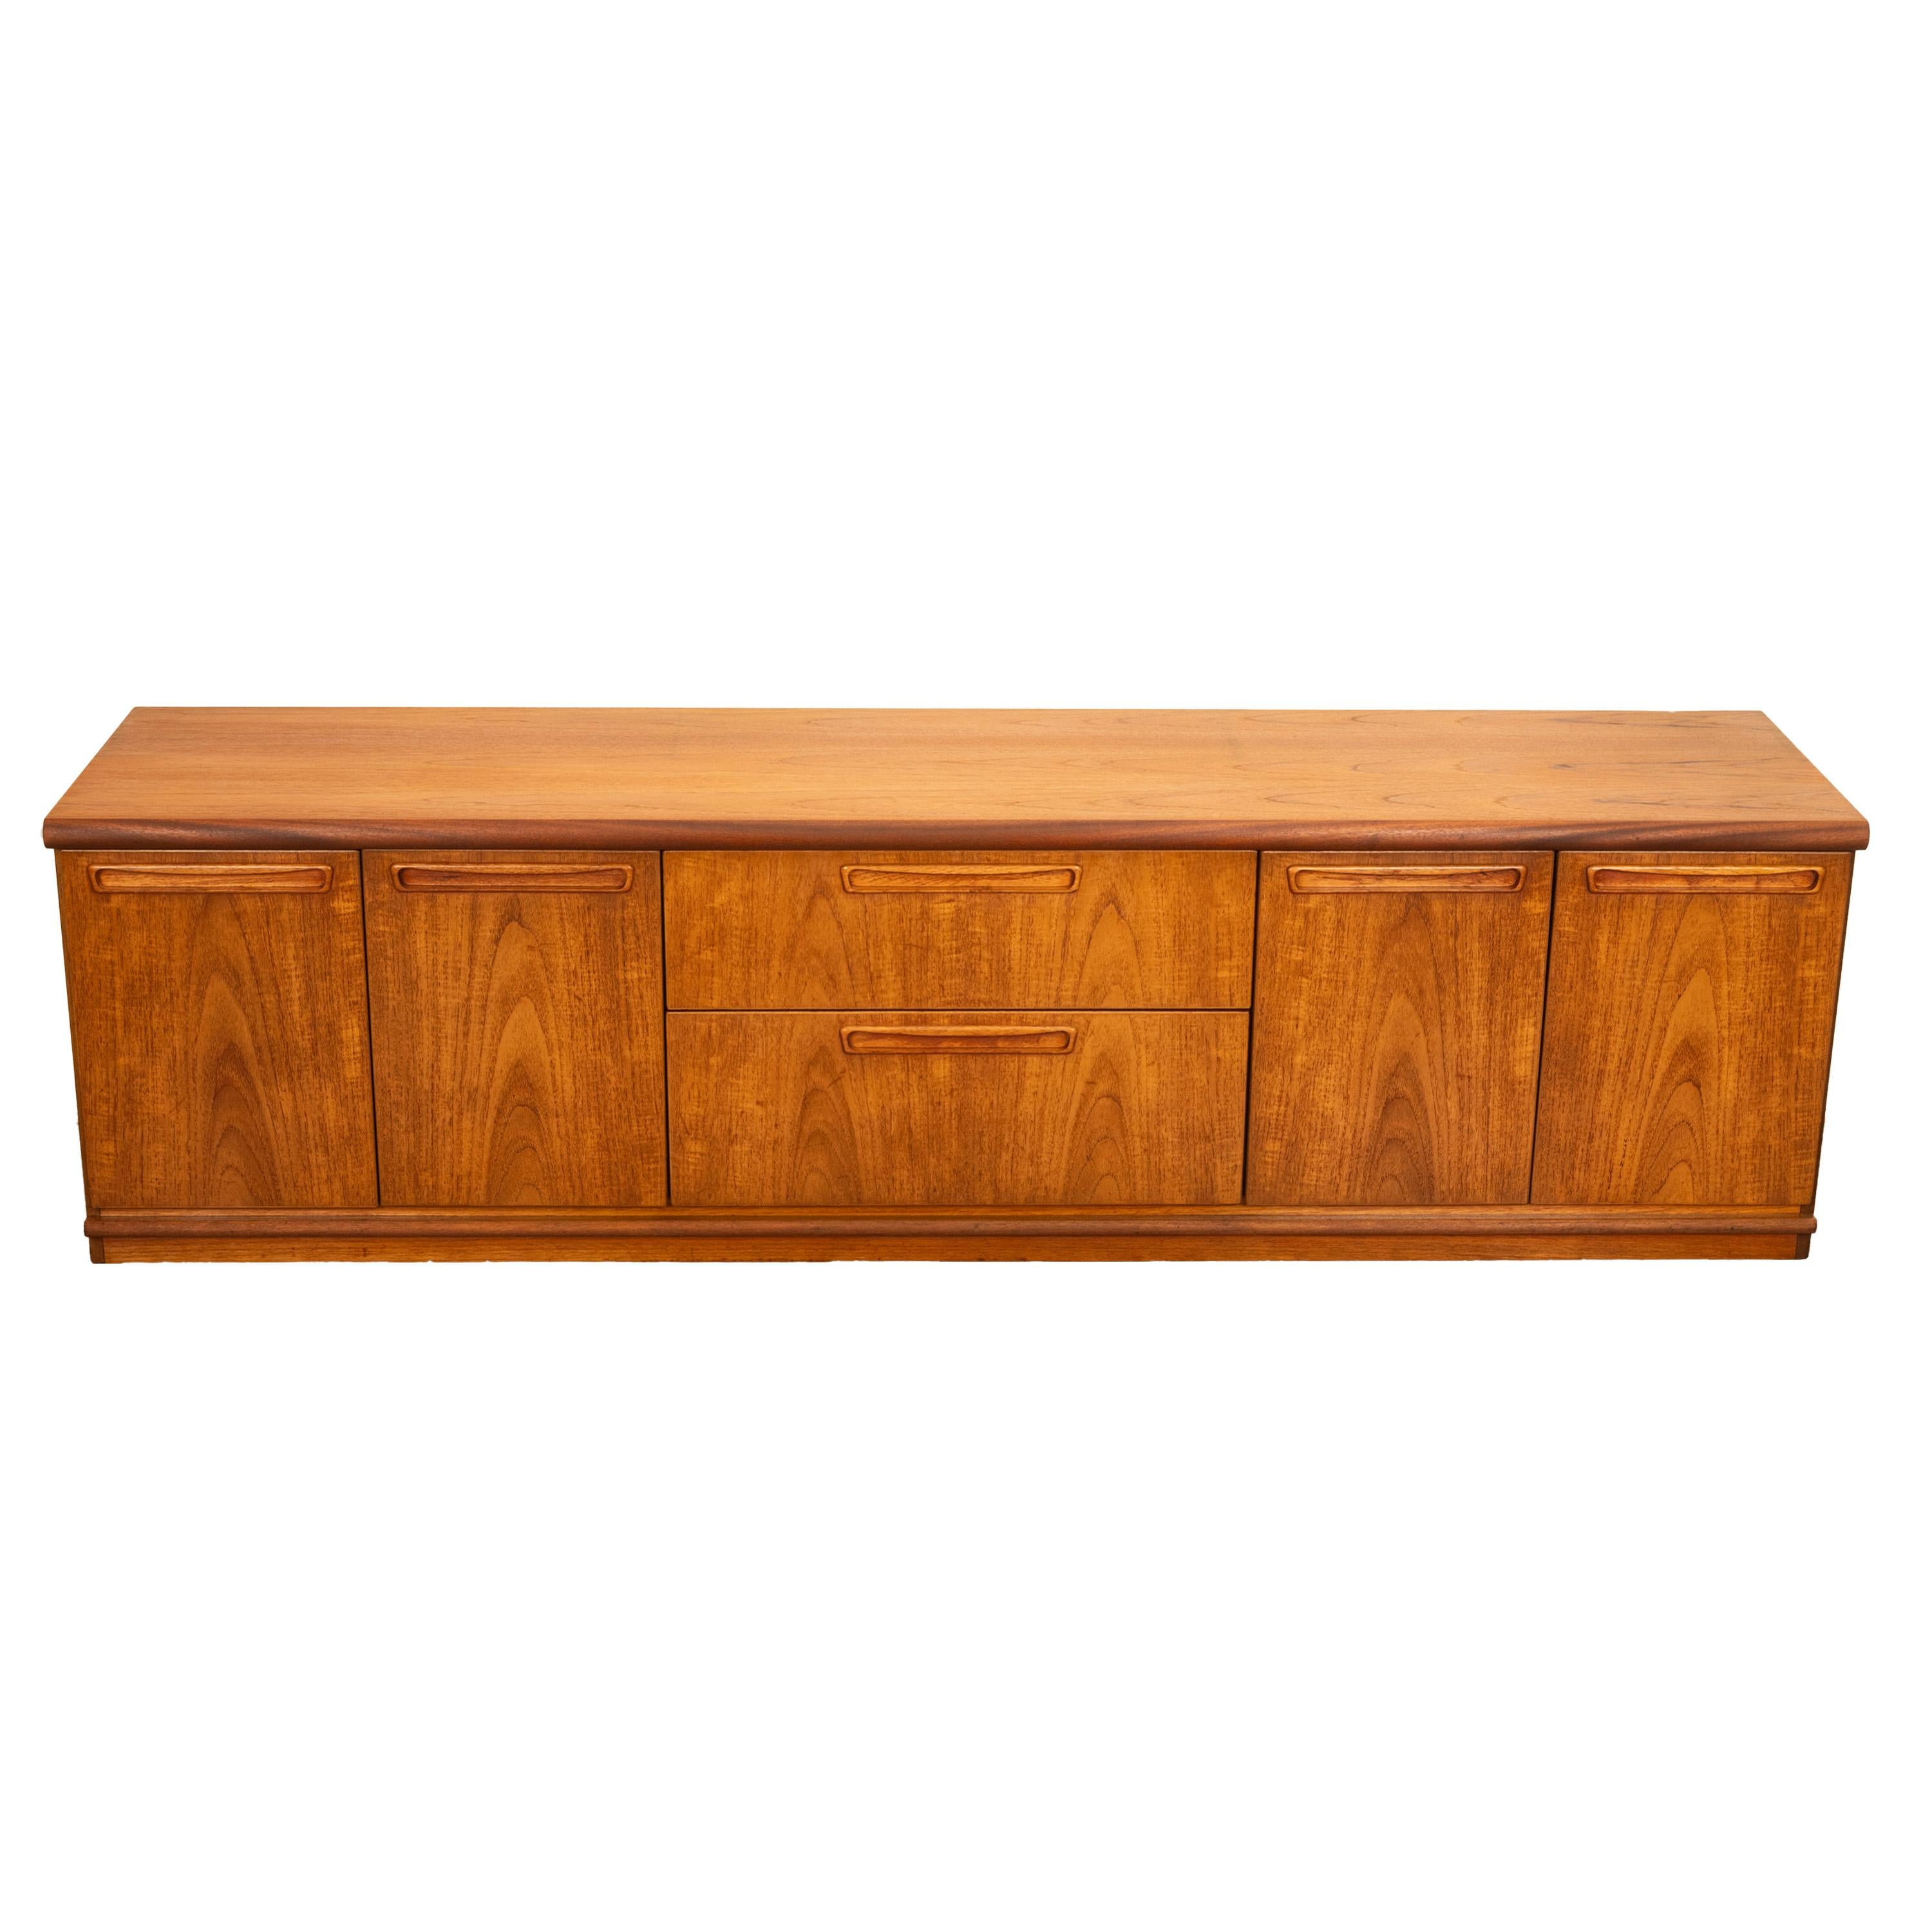 A good long original vintage Mid Century Modern Danish style teak credenza, by Avalon, 1960s.
This long low credenza made from teak has twin cupboard doors at each end, the one on the left side enclosing a drawer and a shelf, to the center is a pair